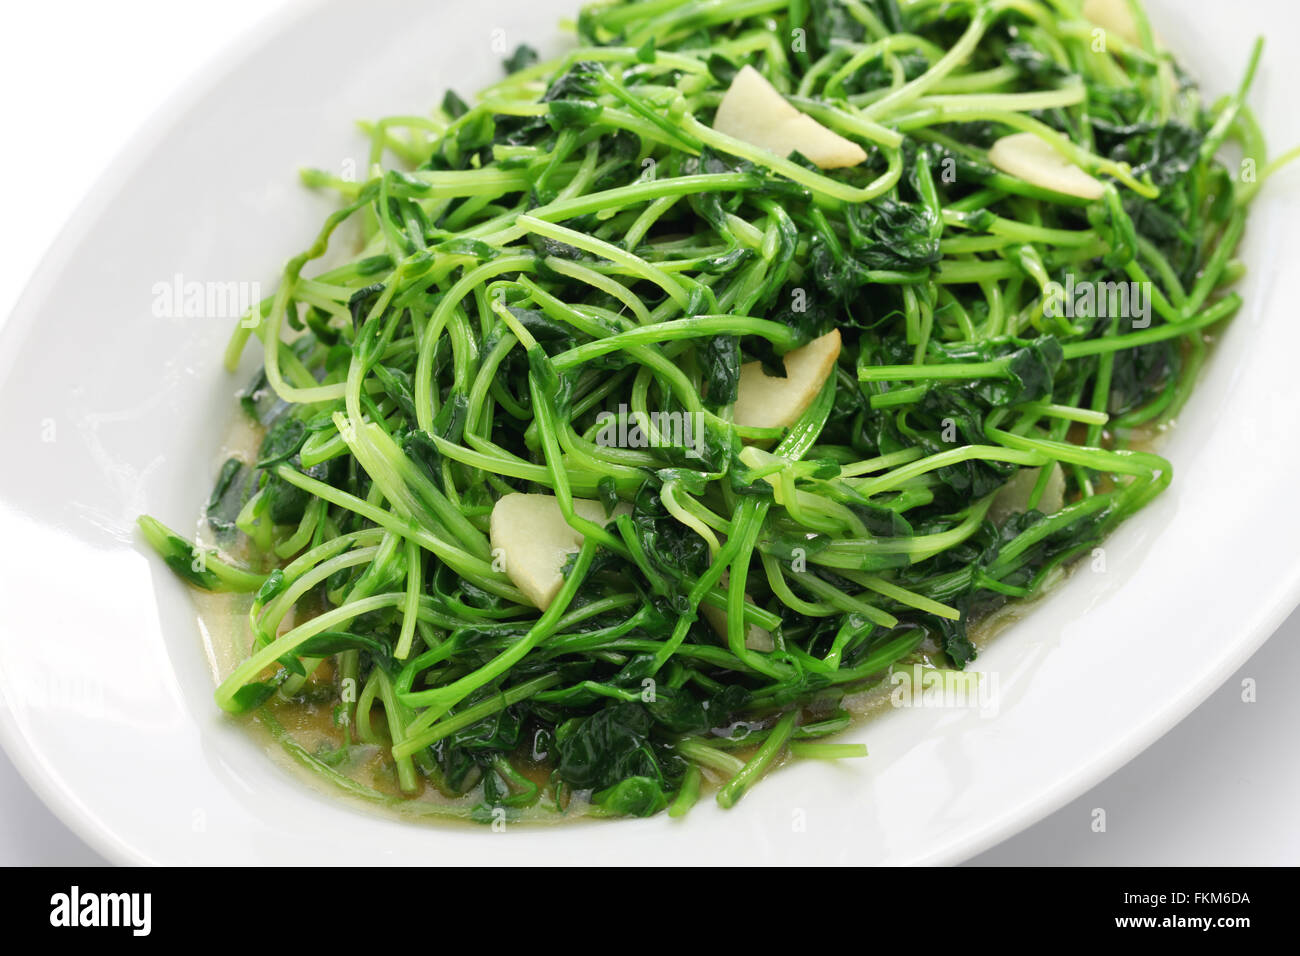 stir fried pea shoots with garlic, chinese cuisine Stock Photo